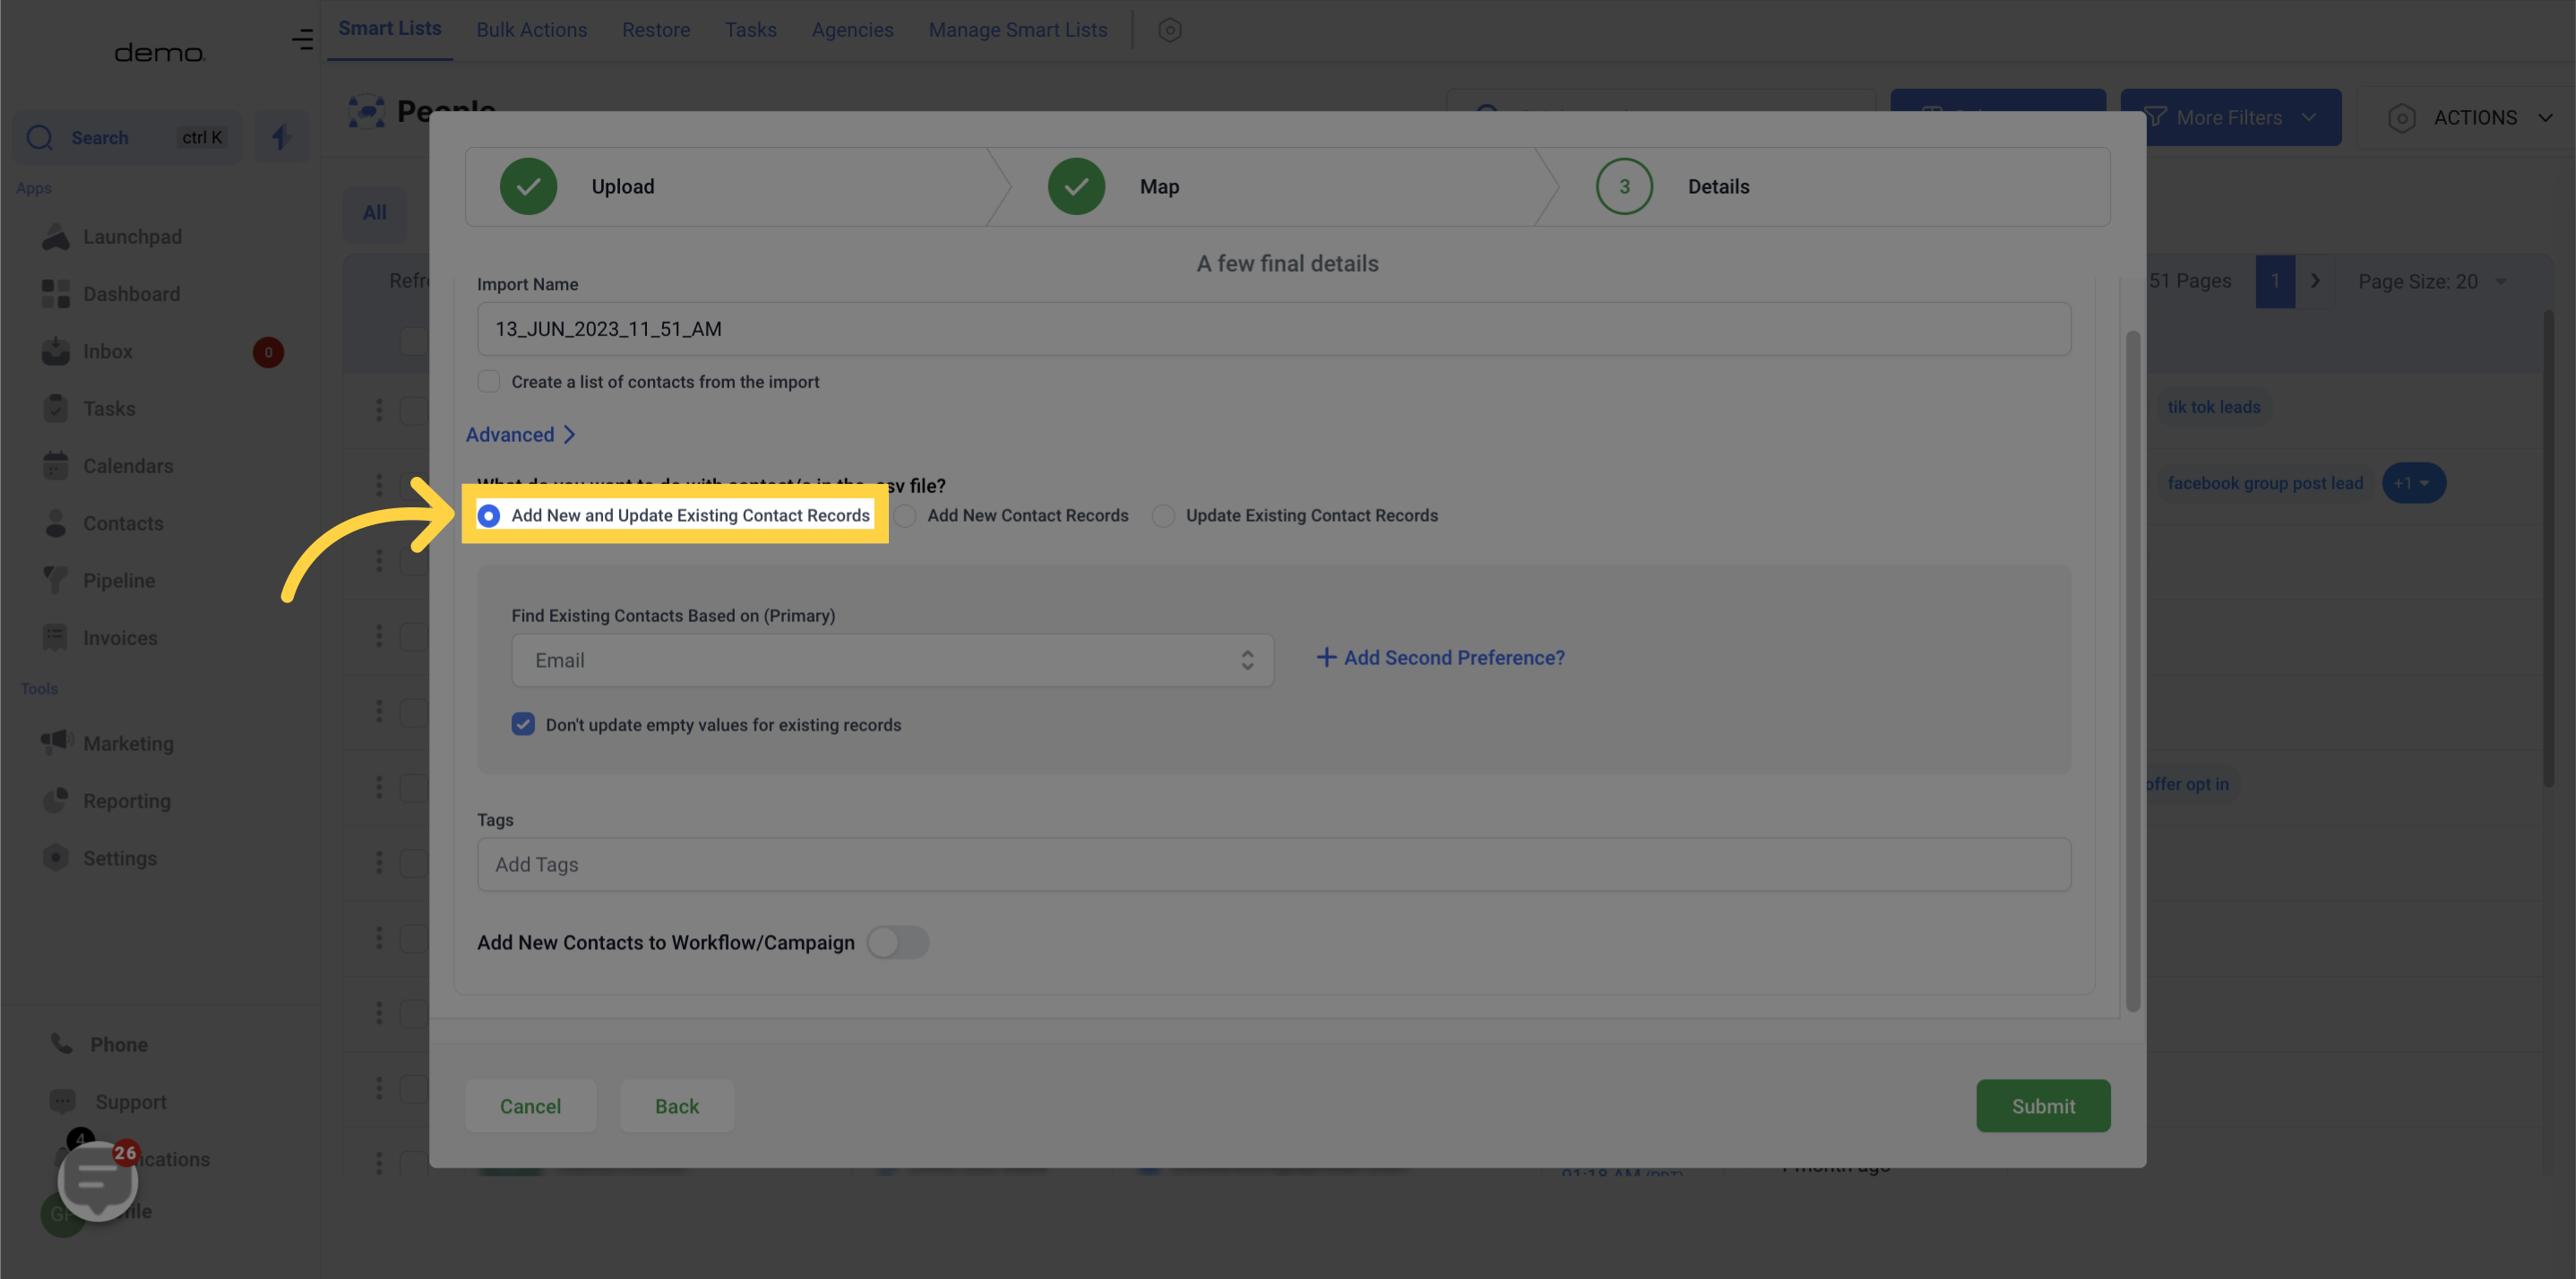 Add New and Update Existing Contact Records